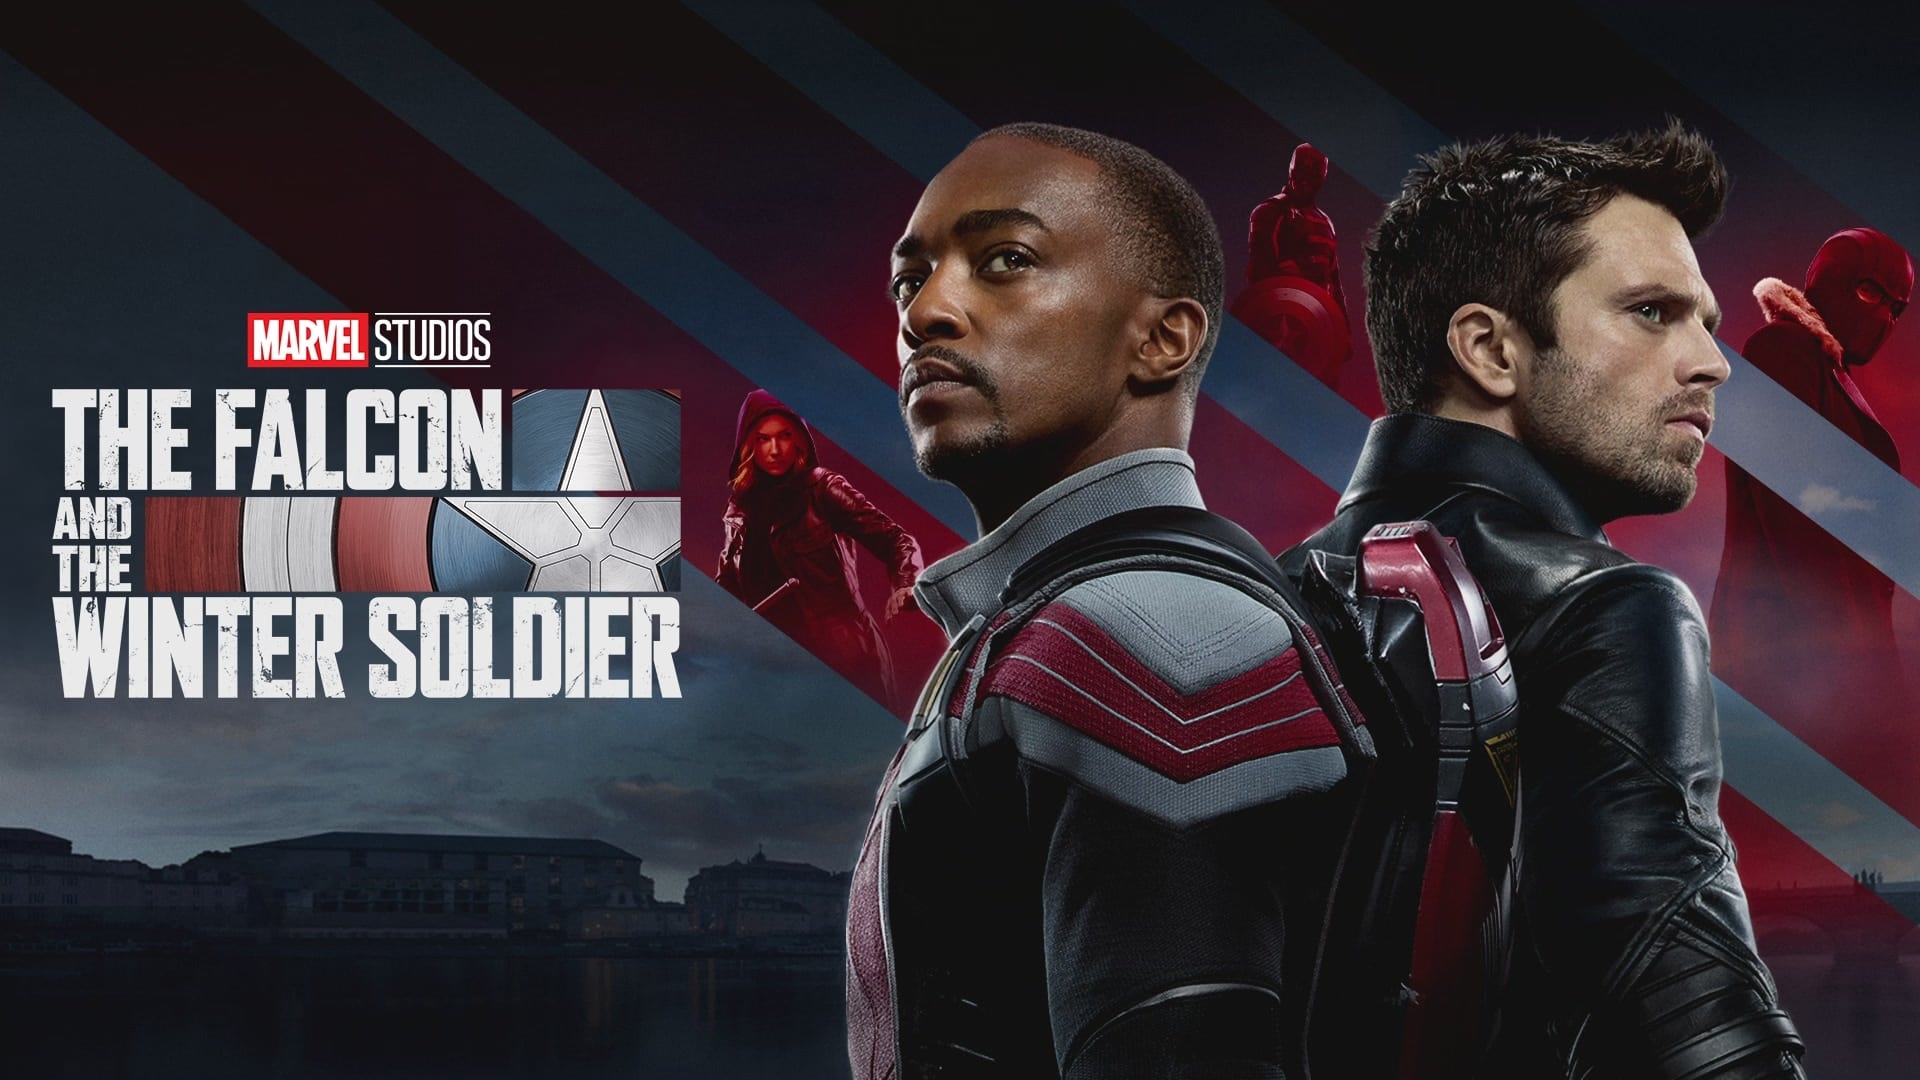 Is The Falcon and The Winter Soldier Season 2 In Works?